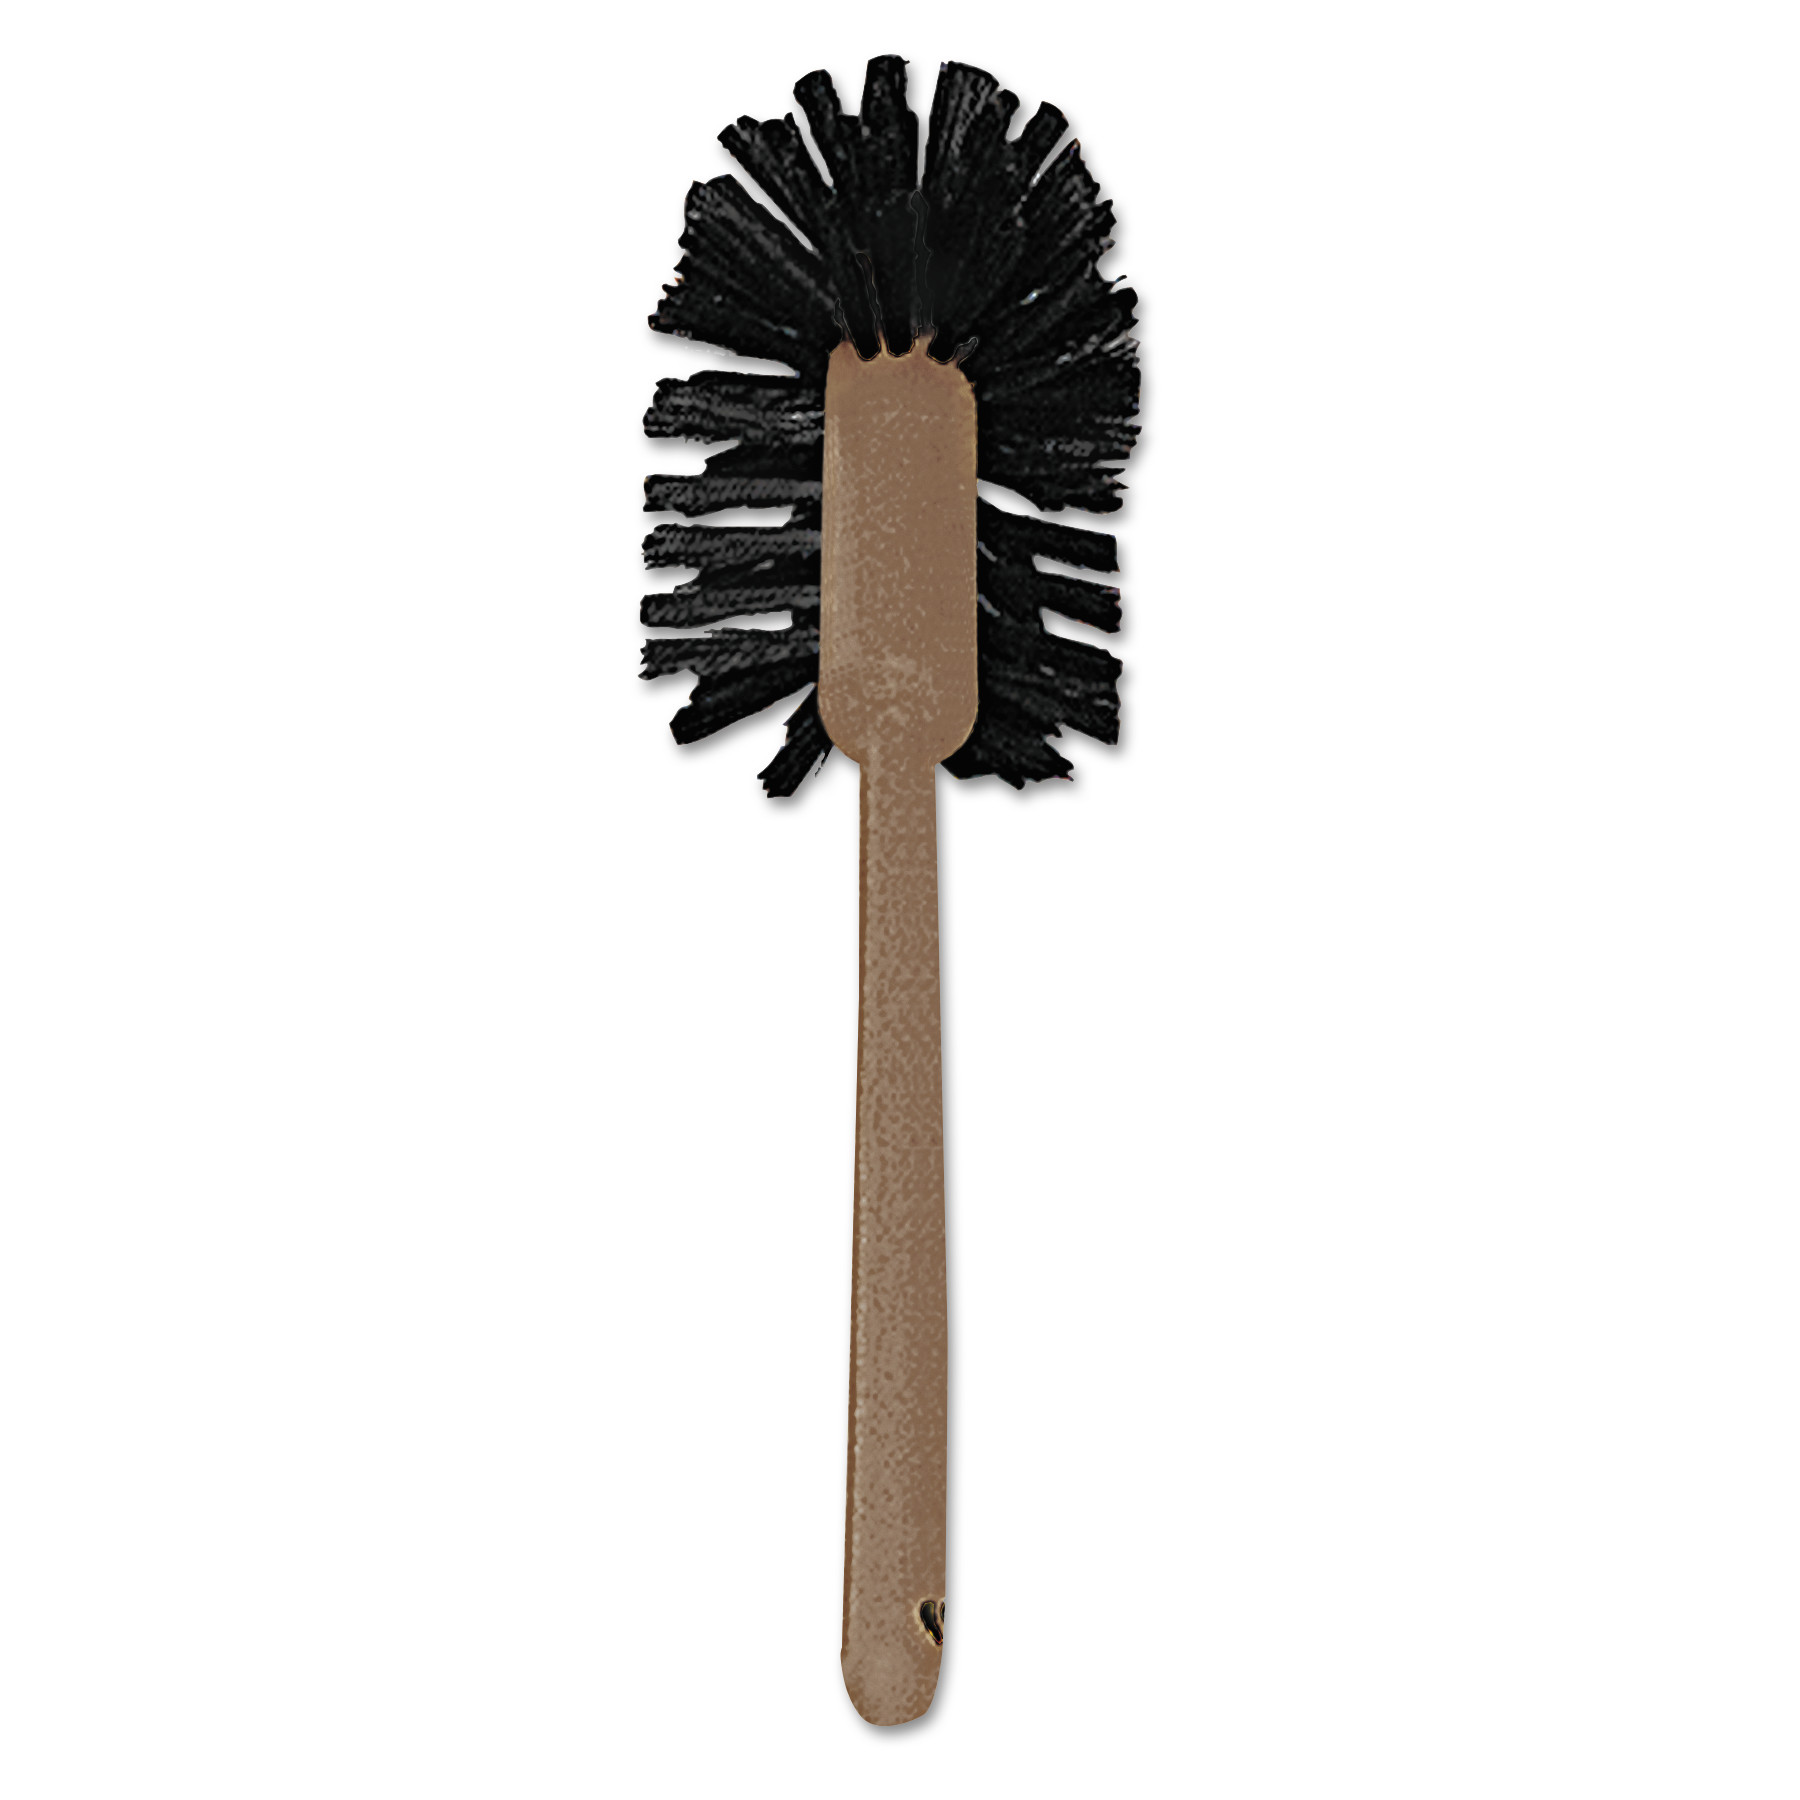  Rubbermaid Commercial FG632000BRN Commercial-Grade Toilet Bowl Brush, 17 Long, Plastic Handle, Brown (RCP6320) 